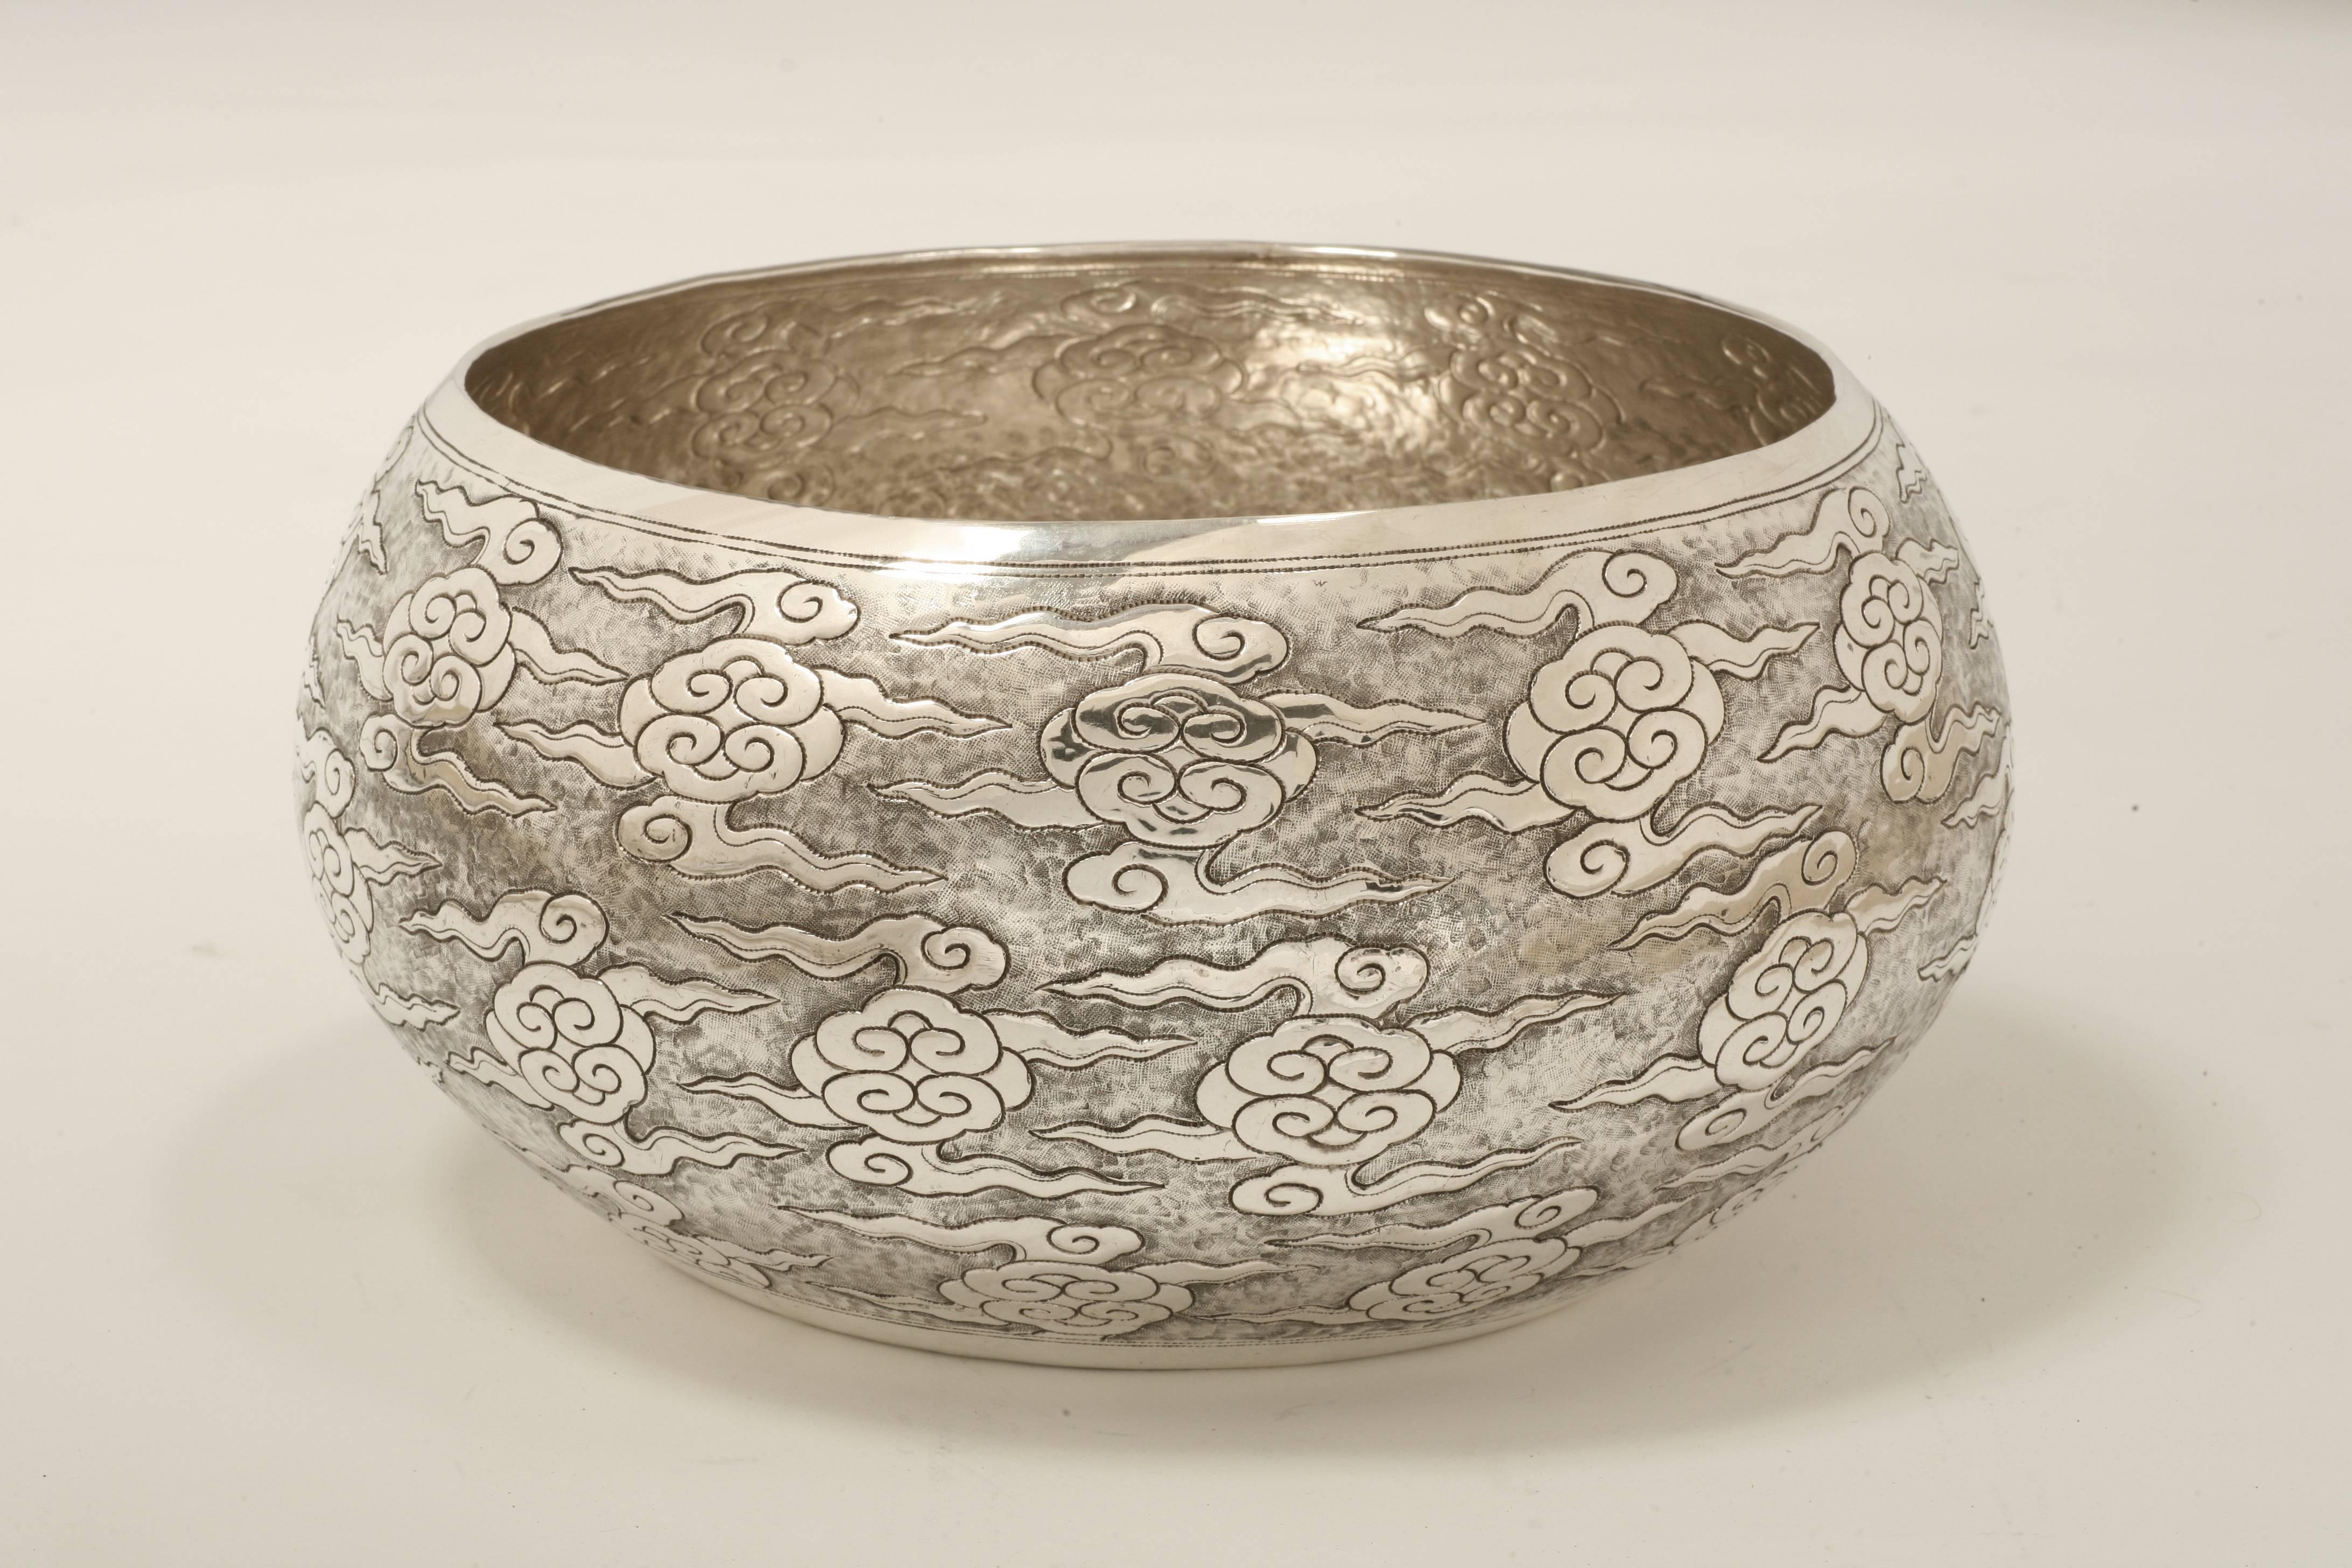 The large contemporary solid silver bowl is finely chased with ruyi (As-you-wish symbol) cloud motif and available in other sizes.
The silver is 90% pure.